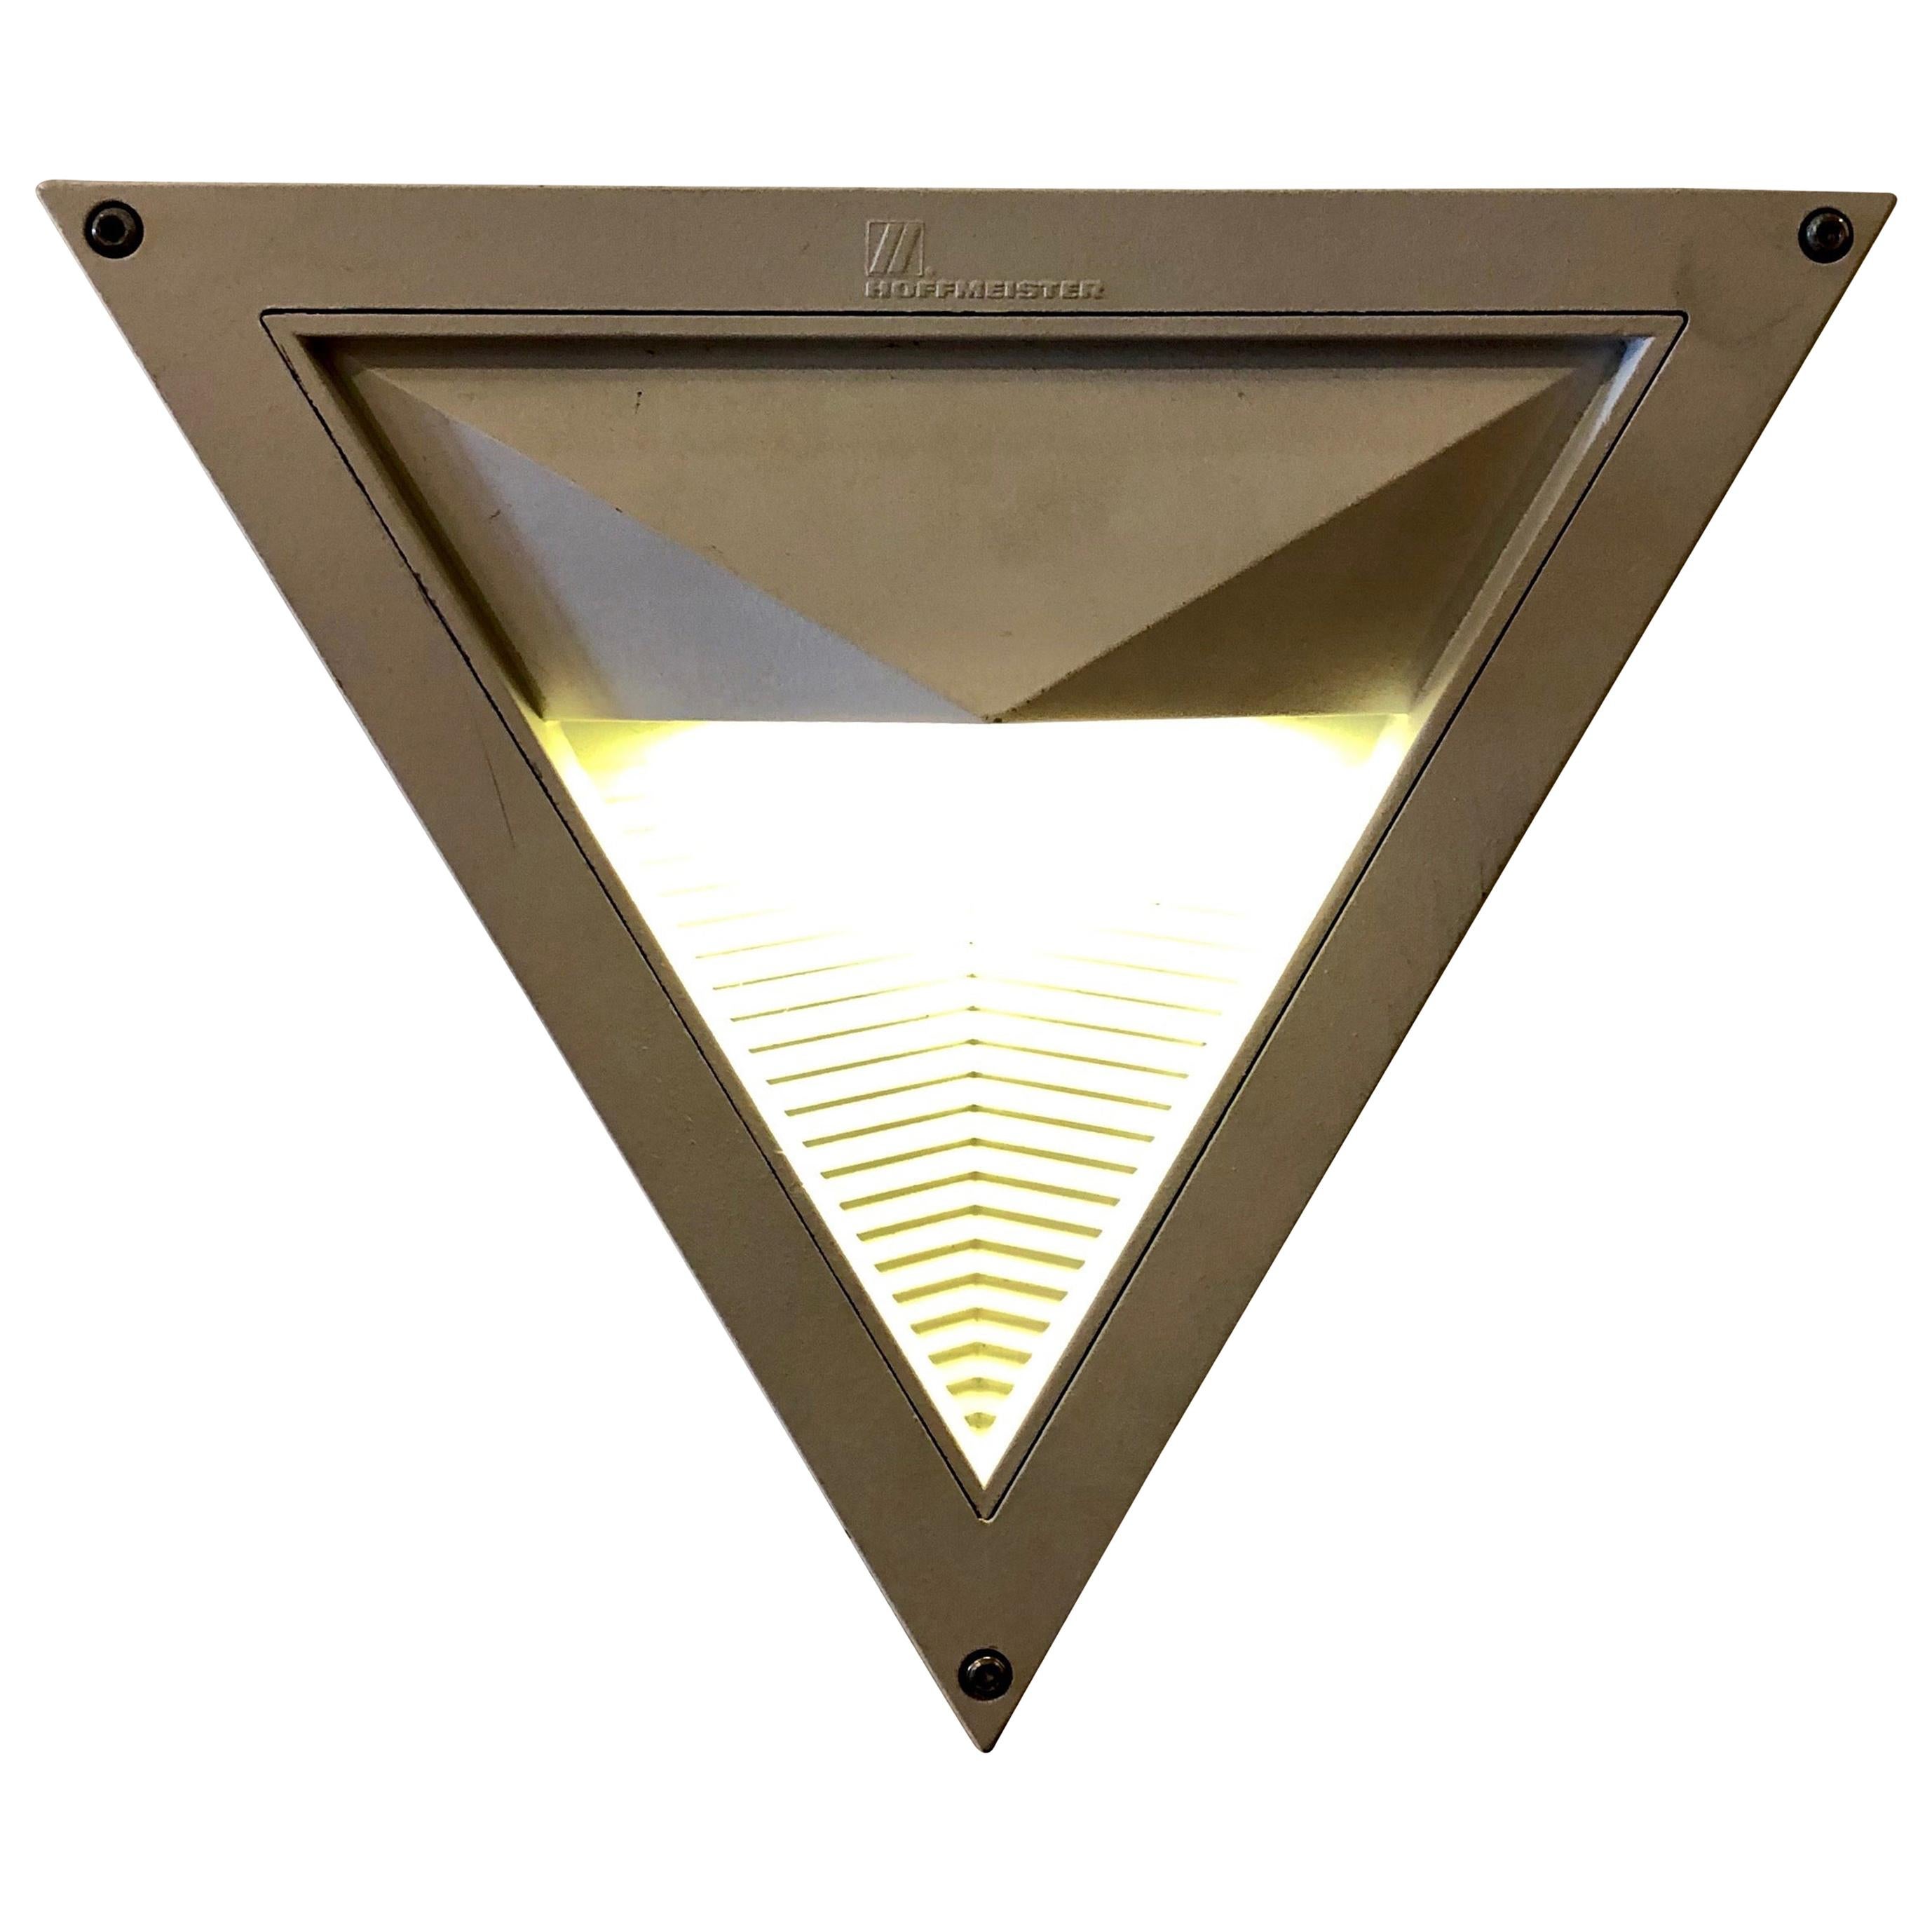 Postmodern Memphis Era Triangular Electric Wall Sconce by Hoffmeister